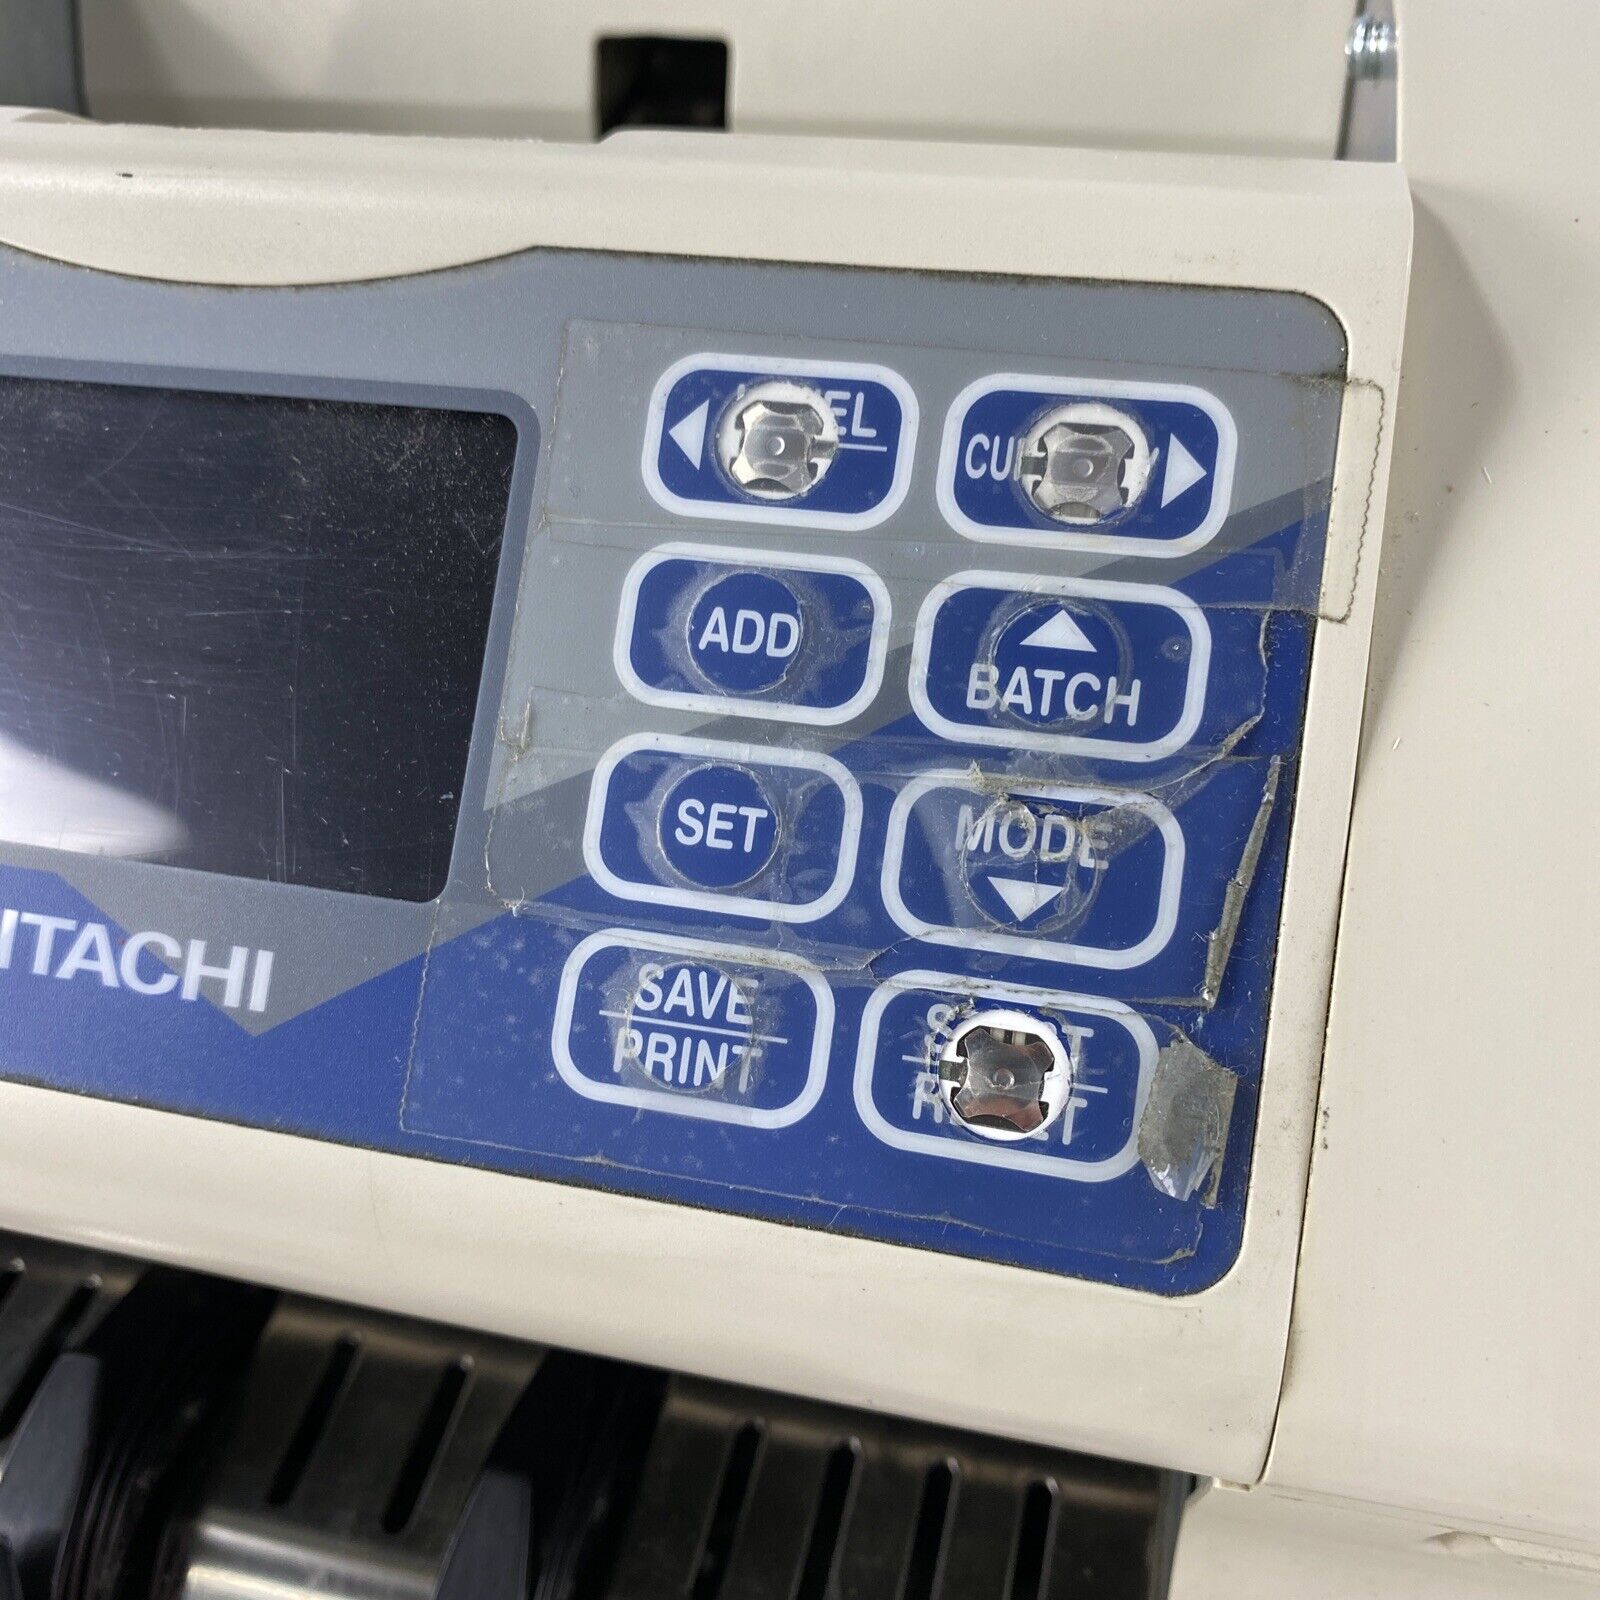 Hitachi iH-100 Currency Discriminator Counter with Counterfeit Detections